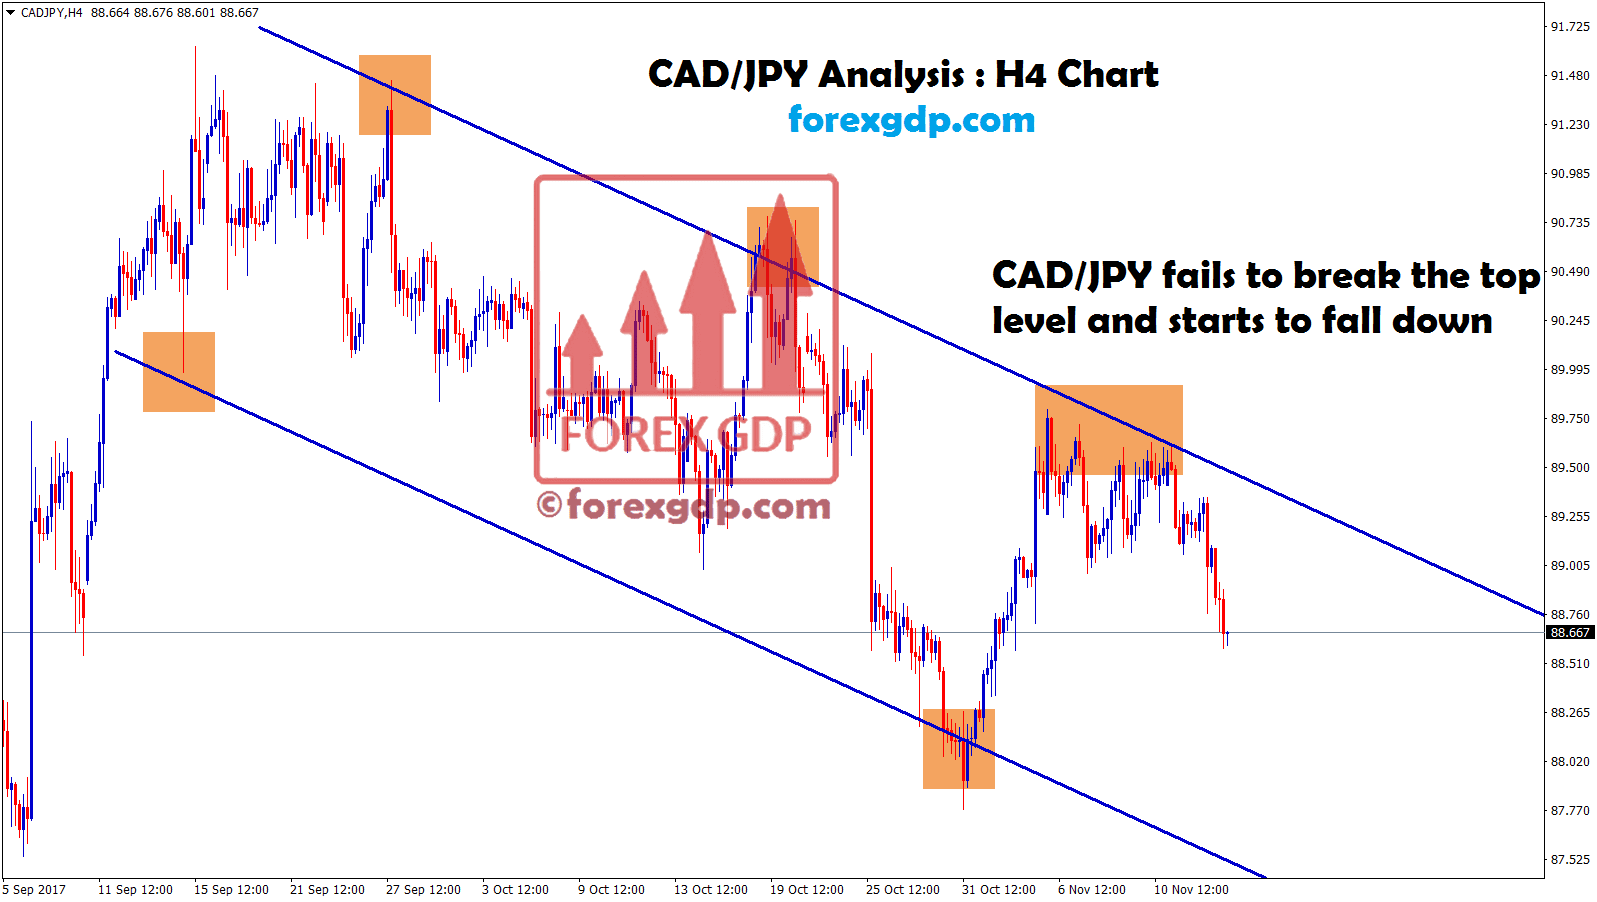 CADJPY fails to break the top level and starts to fall down in downtrend channel